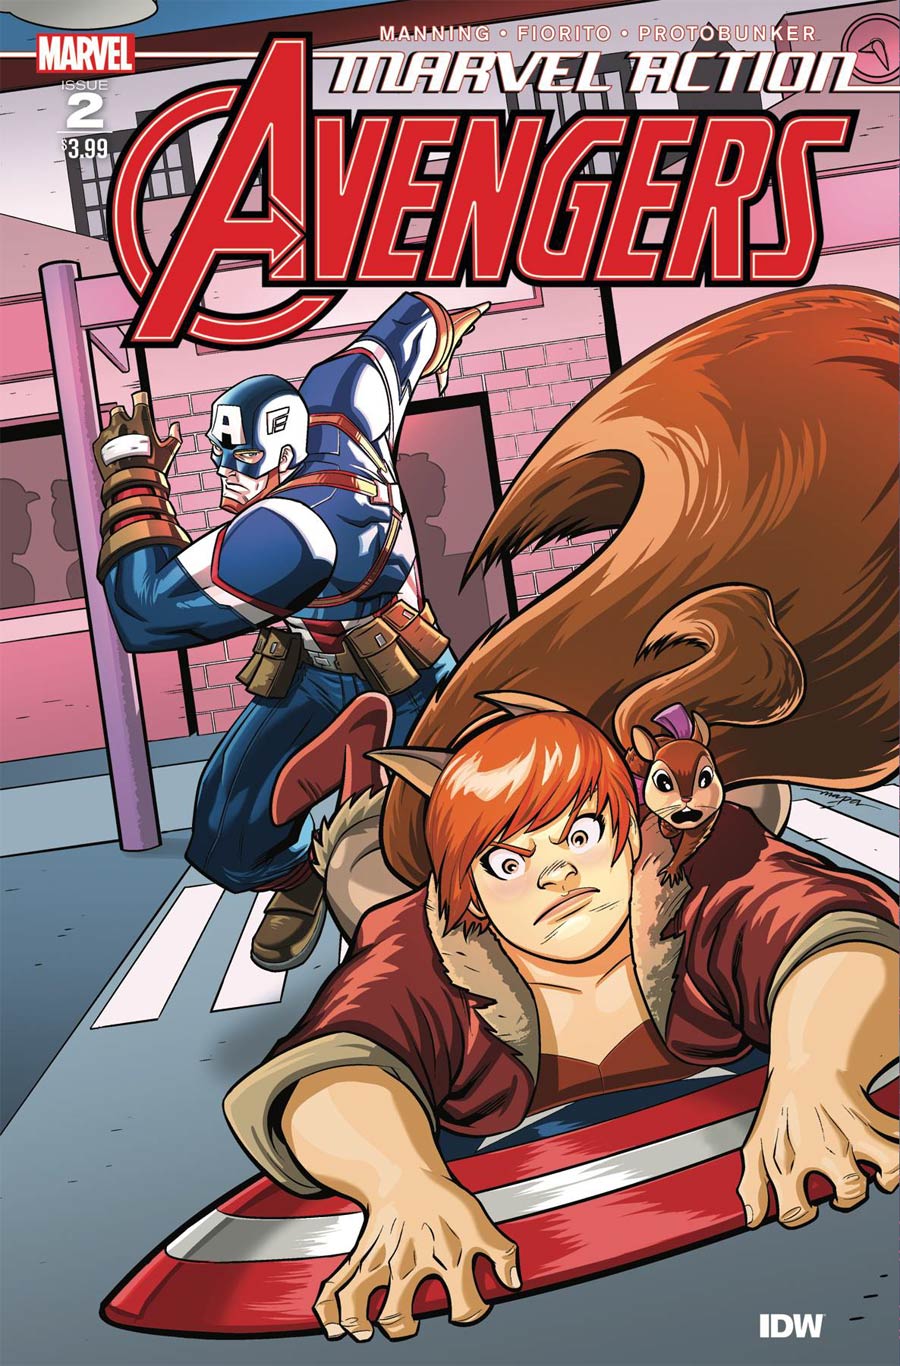 Marvel Action Avengers Vol 2 #2 Cover A Regular Butch Mapa Cover